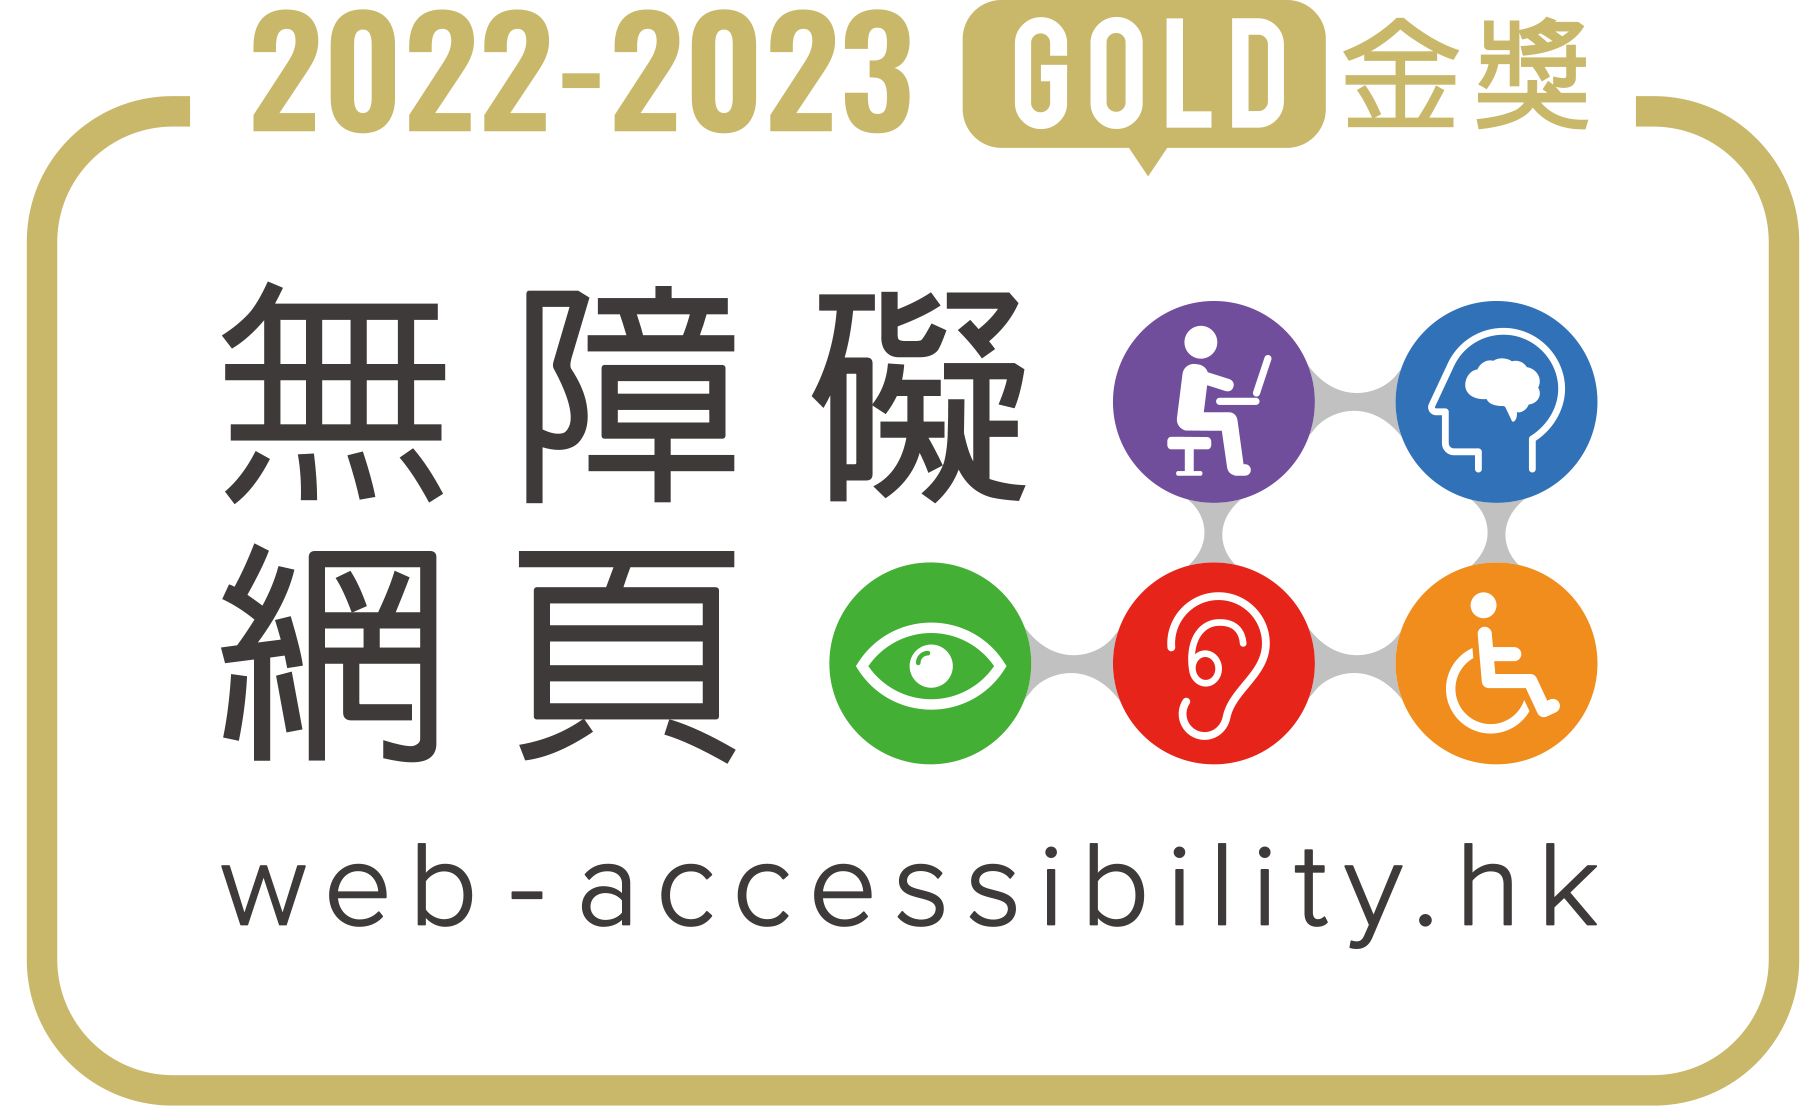 ITSC Homepage Received Web Accessibility Recognition Scheme Gold Award